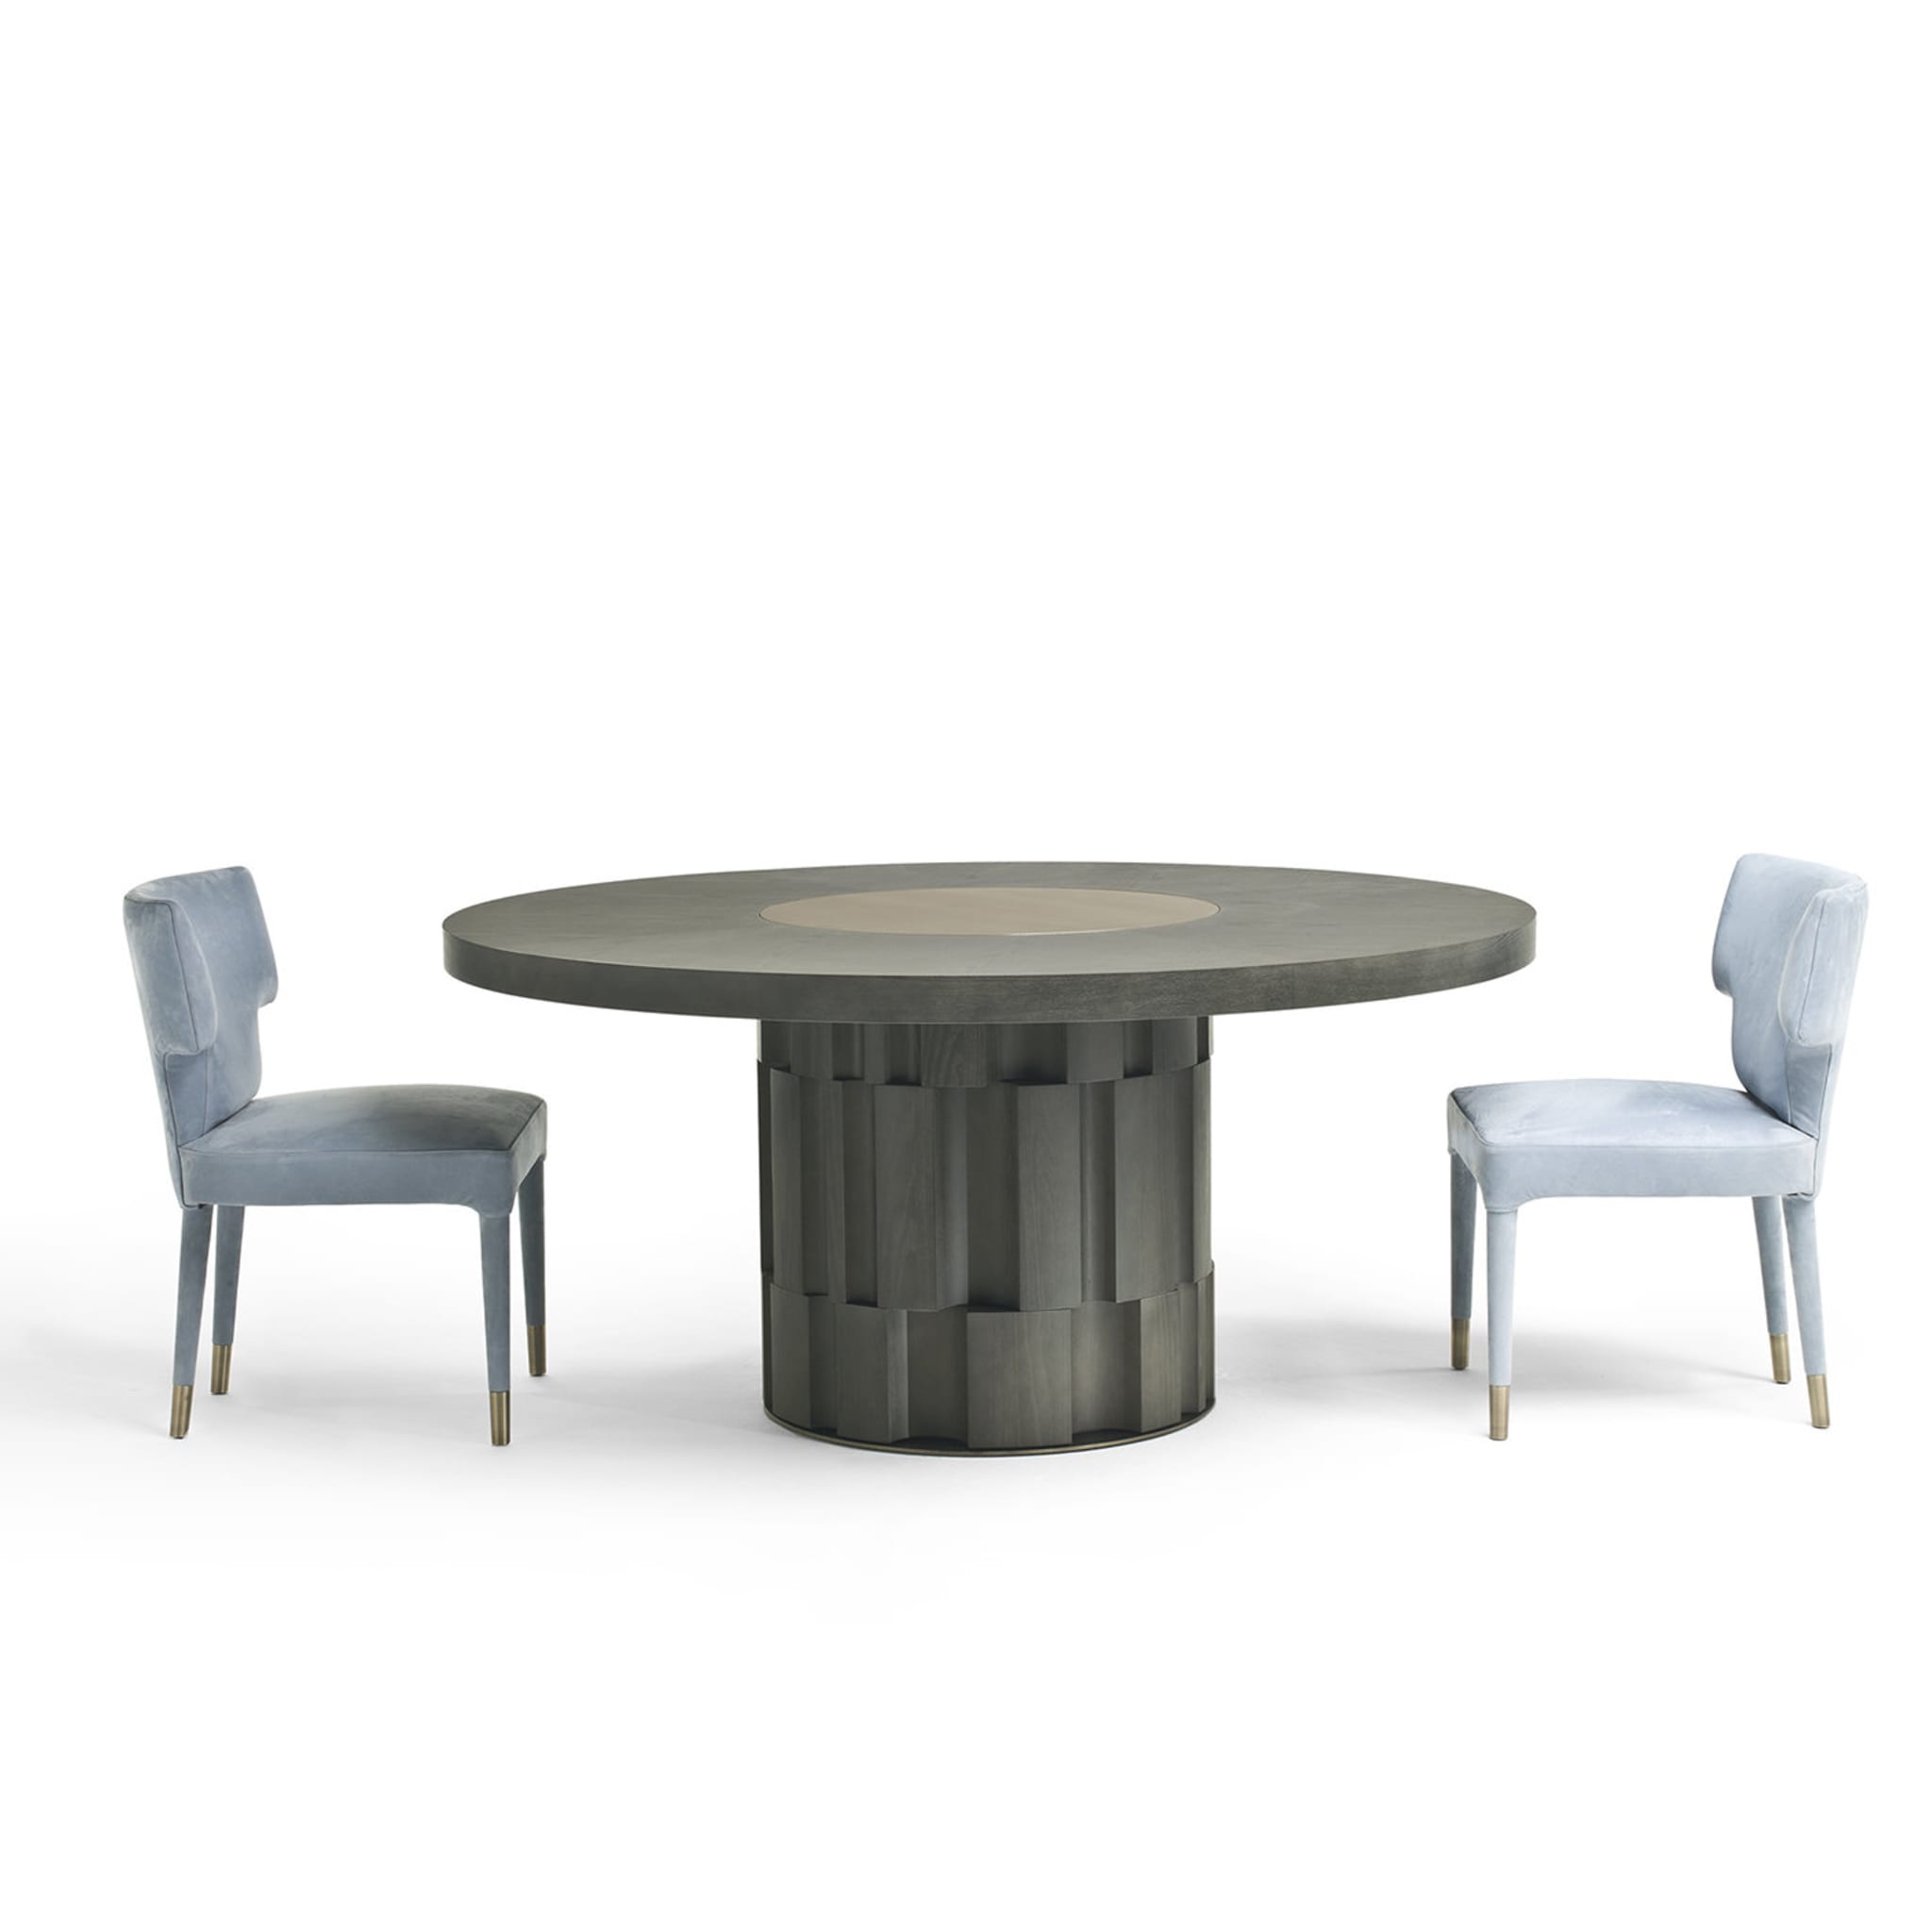 Atmos Dining Table by Dainelli Studio - Alternative view 1